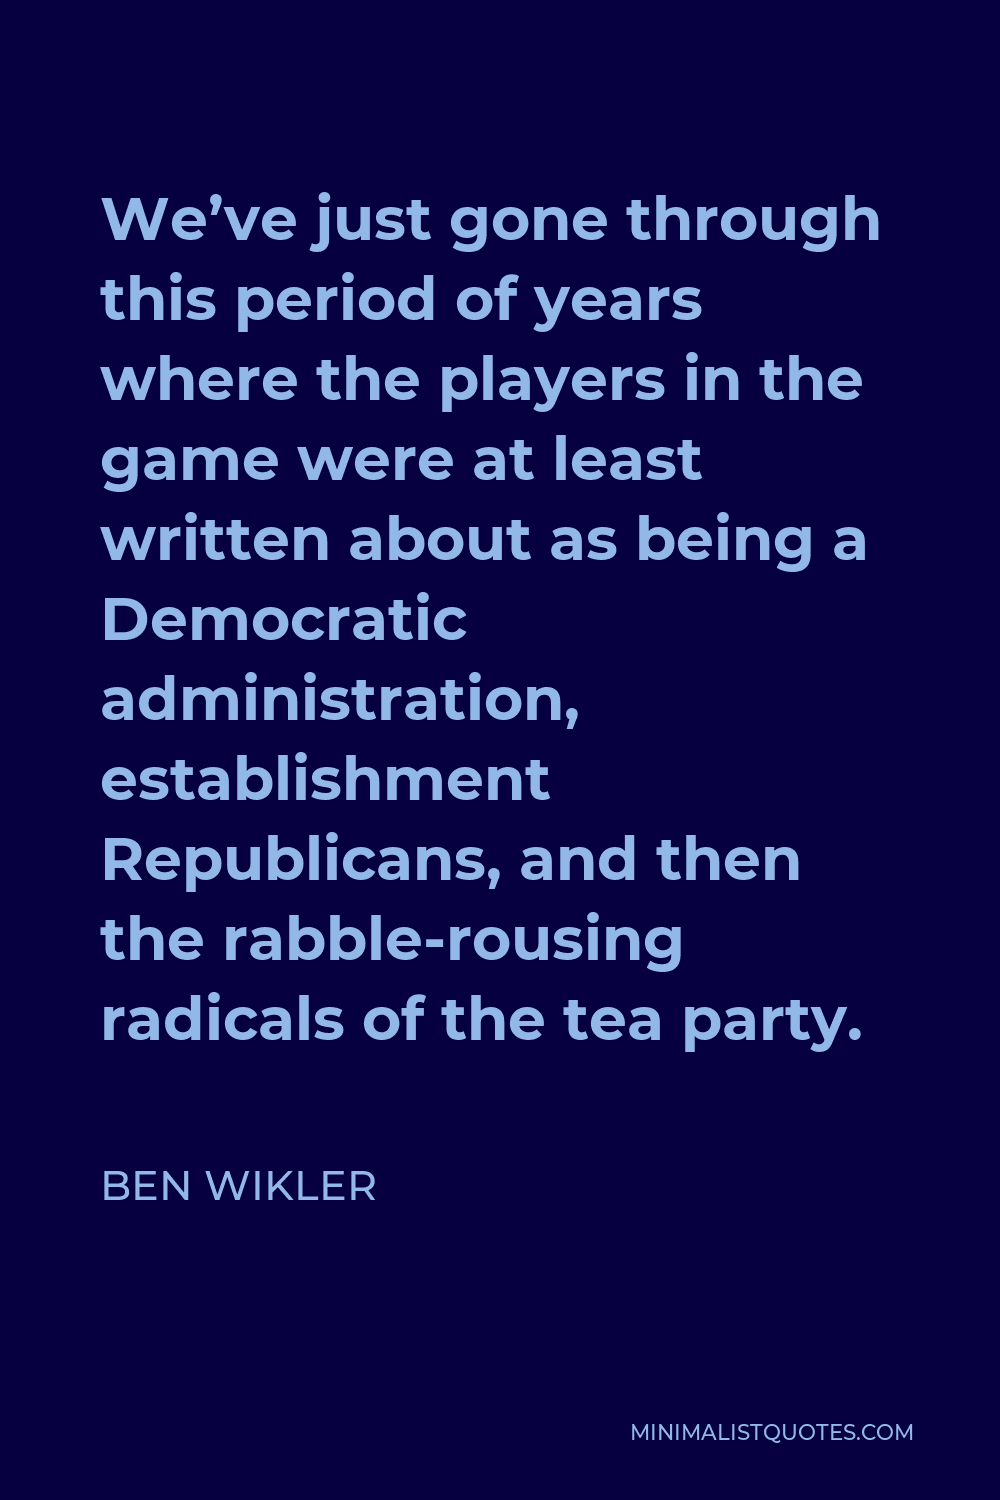 Ben Wikler Quote - We’ve just gone through this period of years where the players in the game were at least written about as being a Democratic administration, establishment Republicans, and then the rabble-rousing radicals of the tea party.